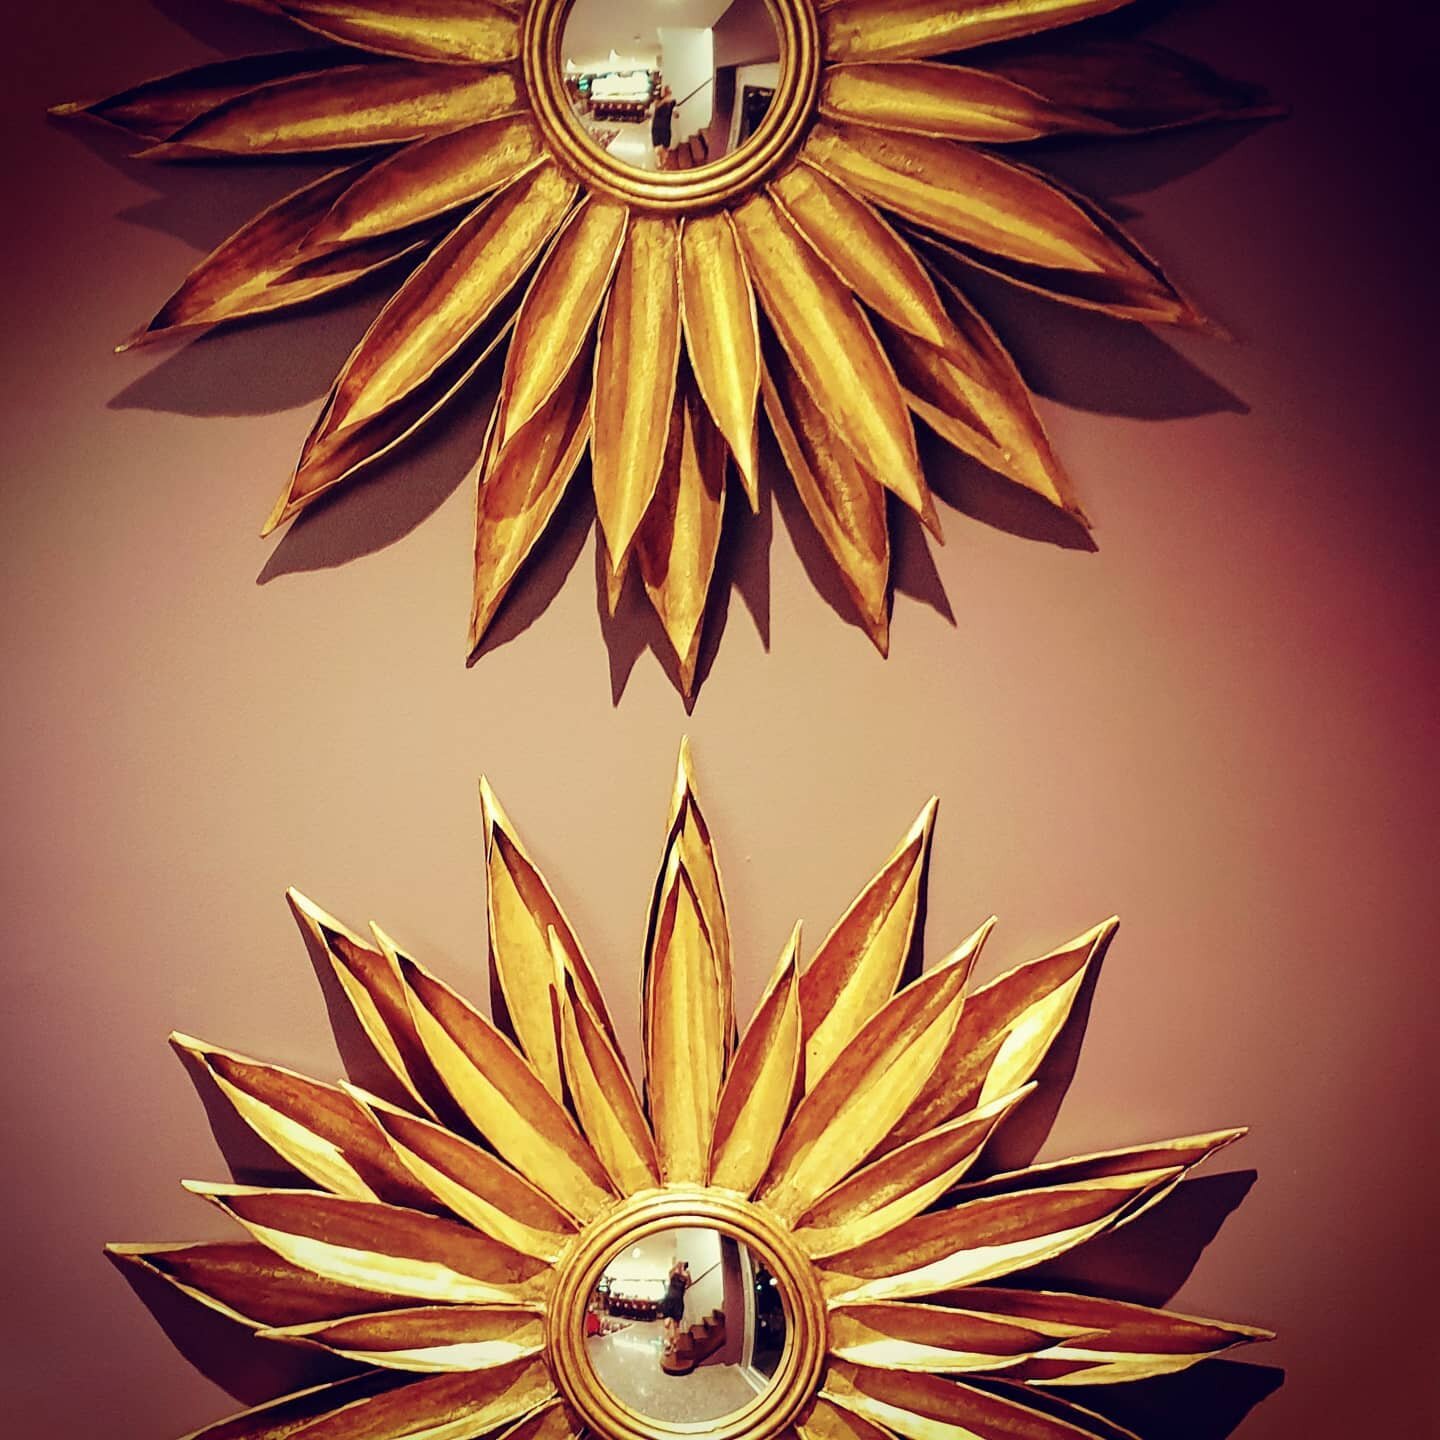 Mancave Sunburst Mirrors.
Sunburst mirrors date back to Louis XIV, known as the &ldquo;Sun King&rdquo;, and as the story goes, he used to stare into his sunburst mirror each morning to see his face in the center of the sun&rsquo;s rays.&nbsp;&nbsp;🌞